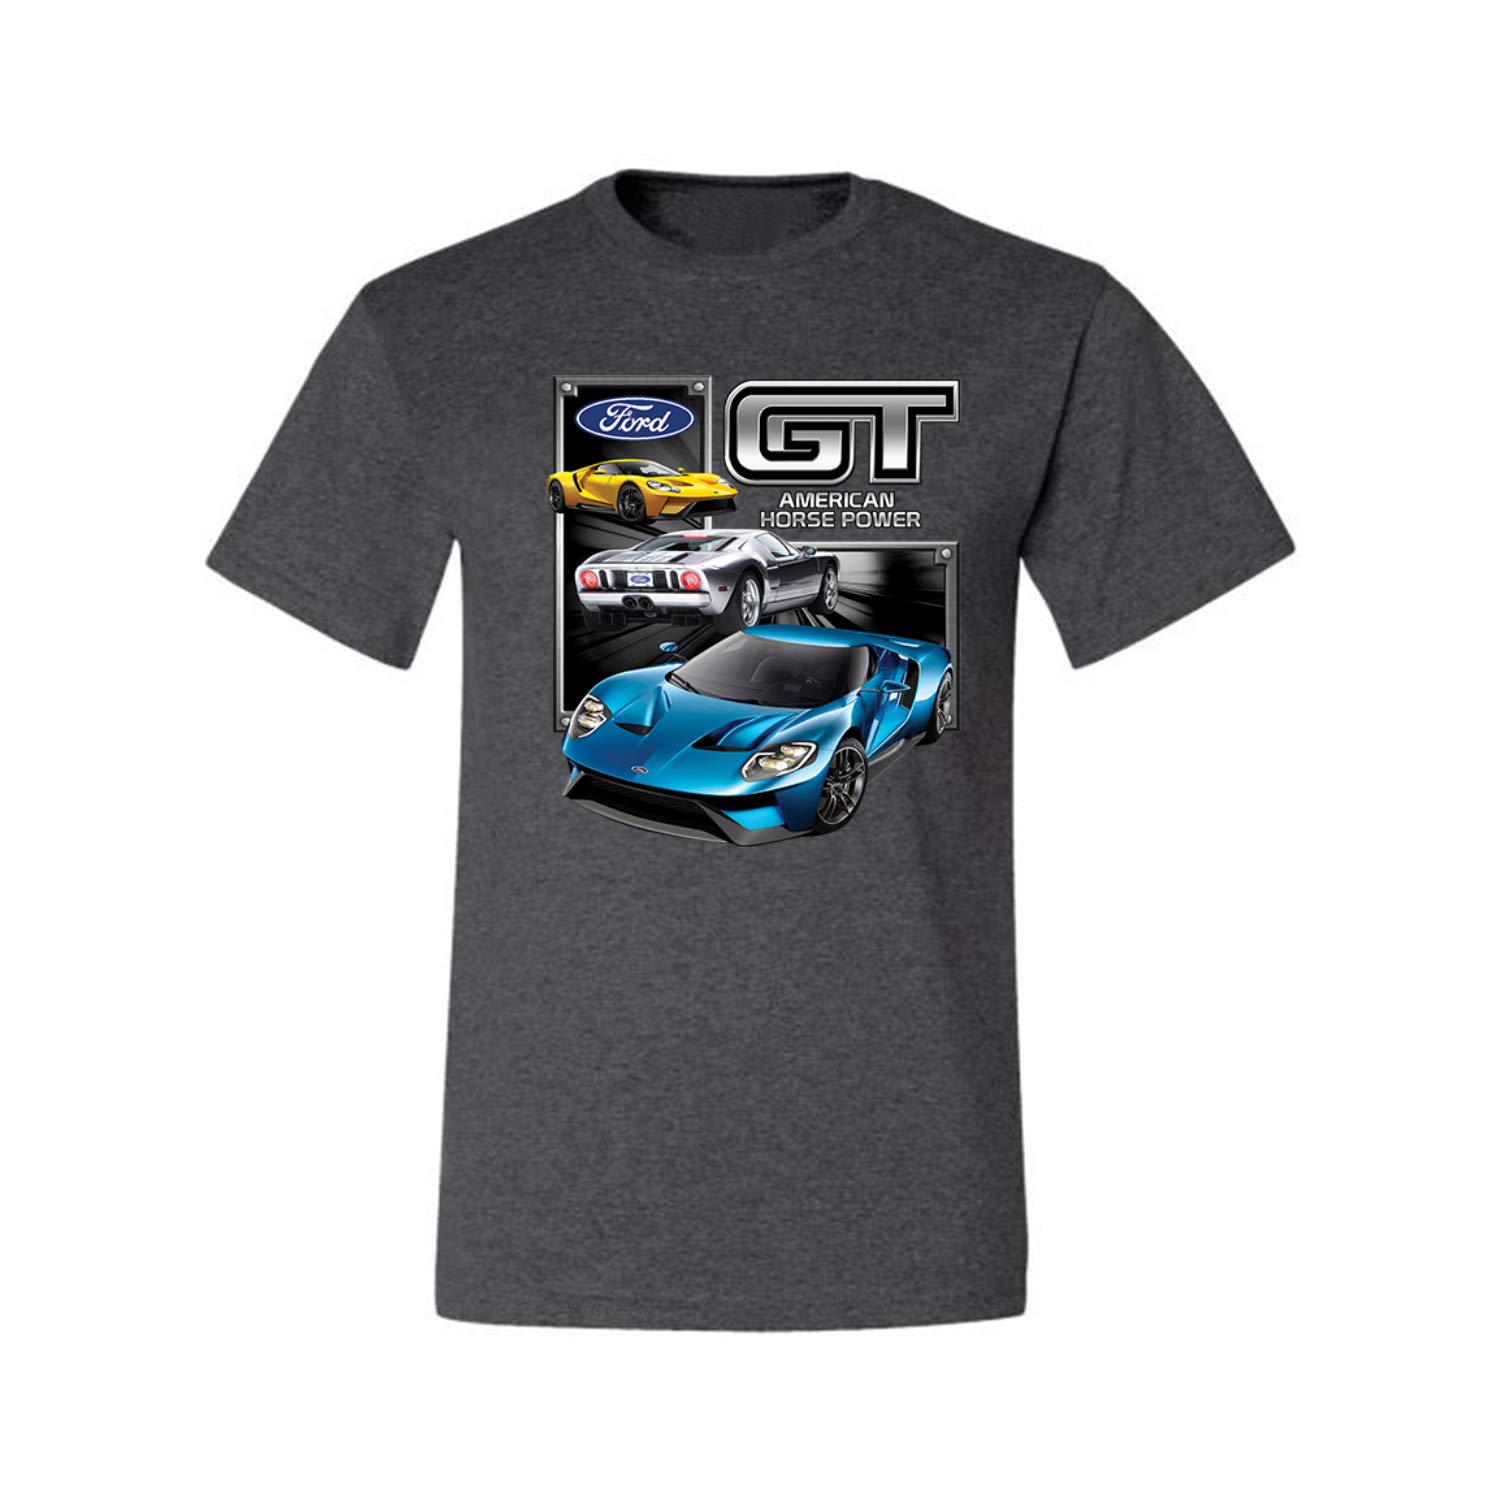 Ford GT American Horse Power Mustang Cars and Trucks Men's Graphic T-Shirt, Heather Black, Large